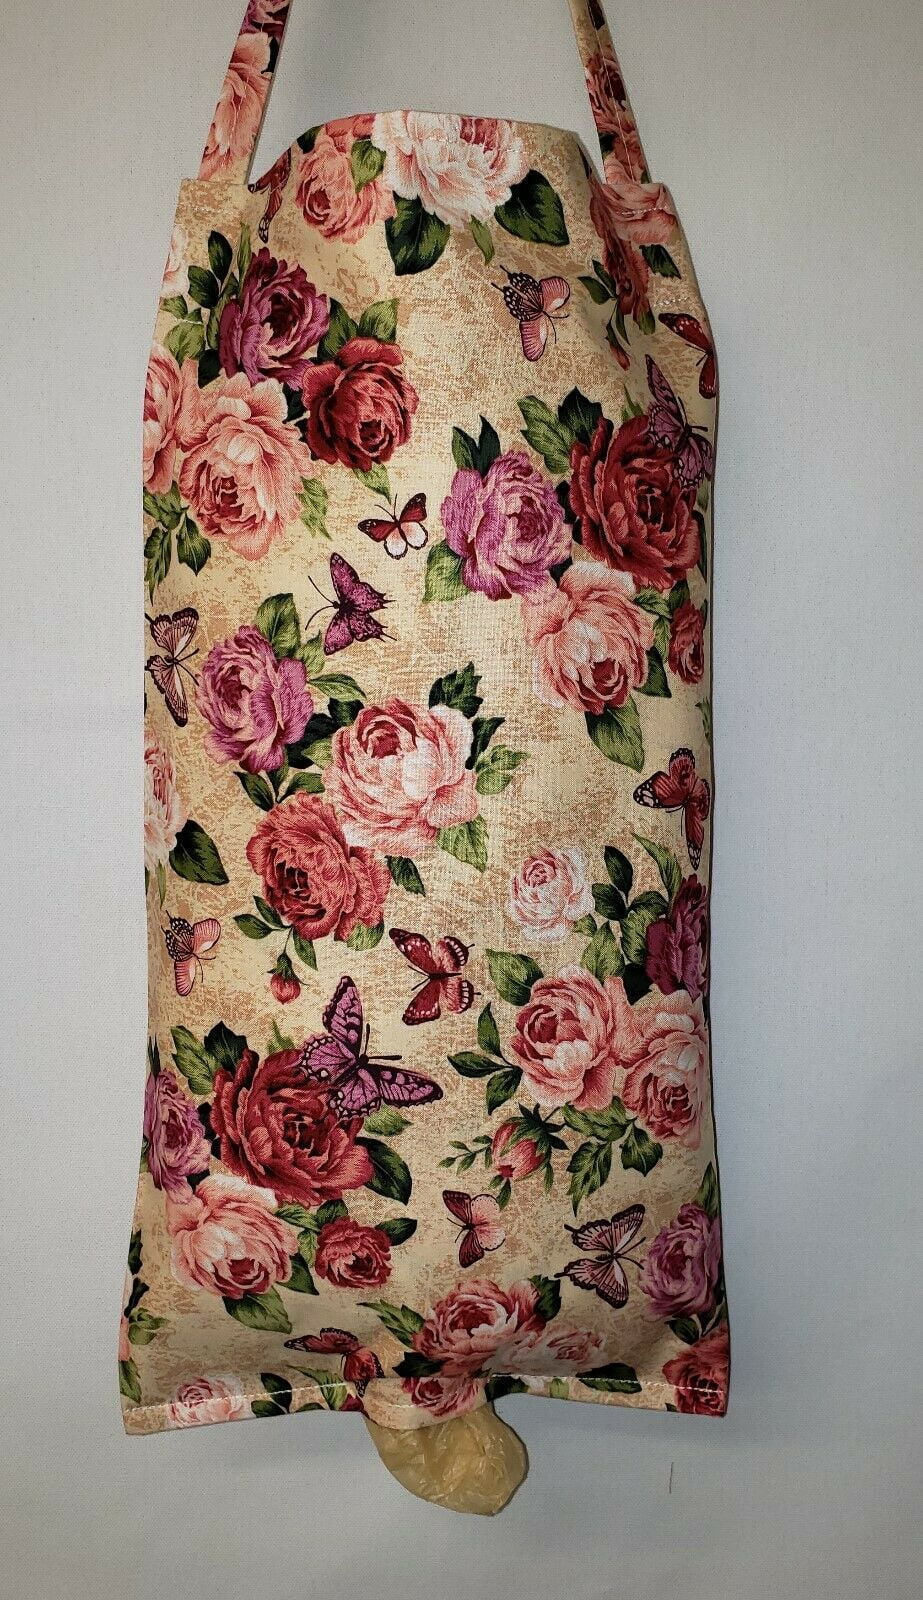 Roses & Butterflies Grocery Plastic Shopping Bag Holder by Penny&#39;s Needful Things - 0 ...